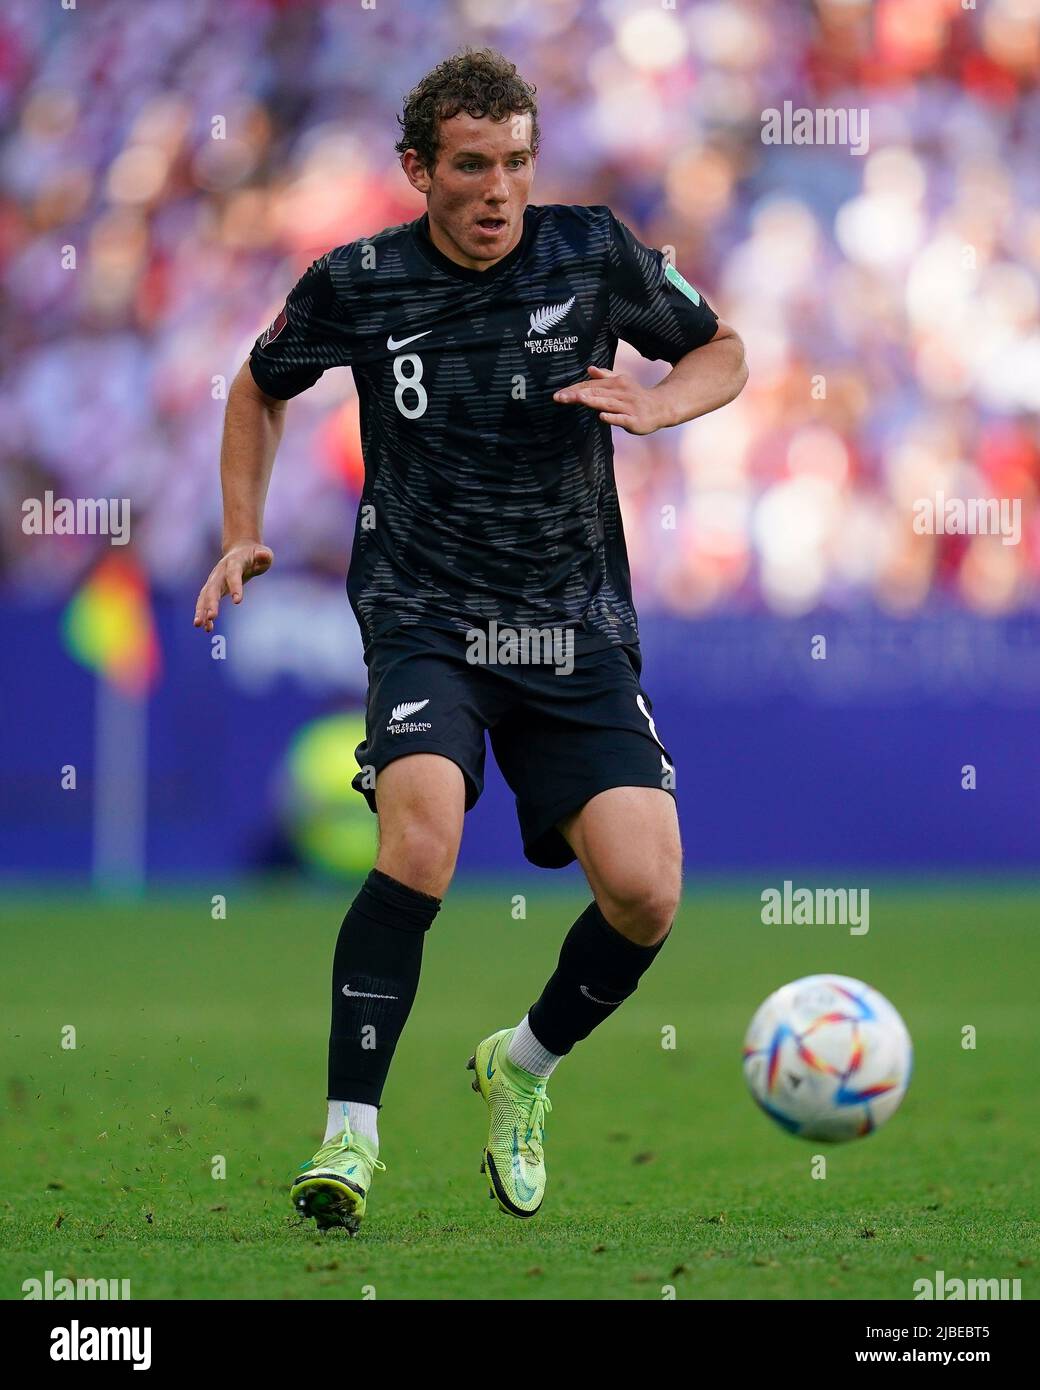 Barcelona, Spain. June 5, 2022, Joe Bell of New Zealand during the friendly match between Peru and New Zealand played at RCDE Stadium on June 5, 2022 in Barcelona, Spain. (Photo by Bagu Blanco / PRESSINPHOTO) Stock Photo